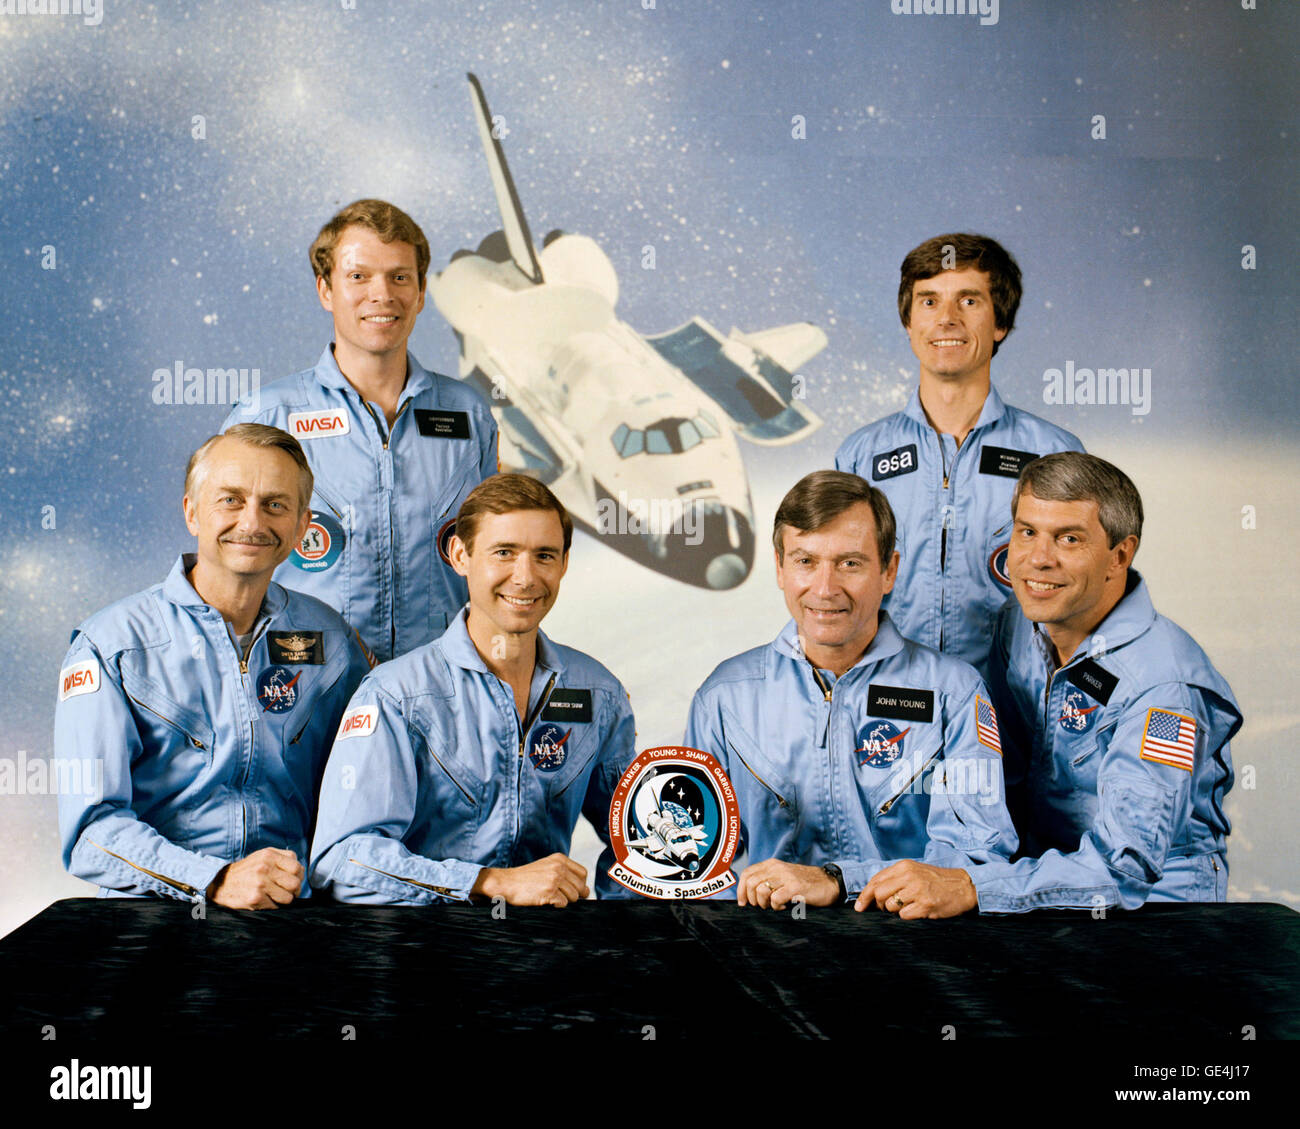 (June 1983) The official portrait of the STS-9 crew. Seated from left to right are Owen Garriott, Mission Specialist; Brewster Shaw, Pilot; John Young, Commander; and Robert Parker, Mission Specialist. Standing from left to right are Byron Lichtenberg and Ulf Merbold, payload specialists. STS-9 was Space Shuttle Columbia's second operational mission.   Image # : S83-35017 Stock Photo